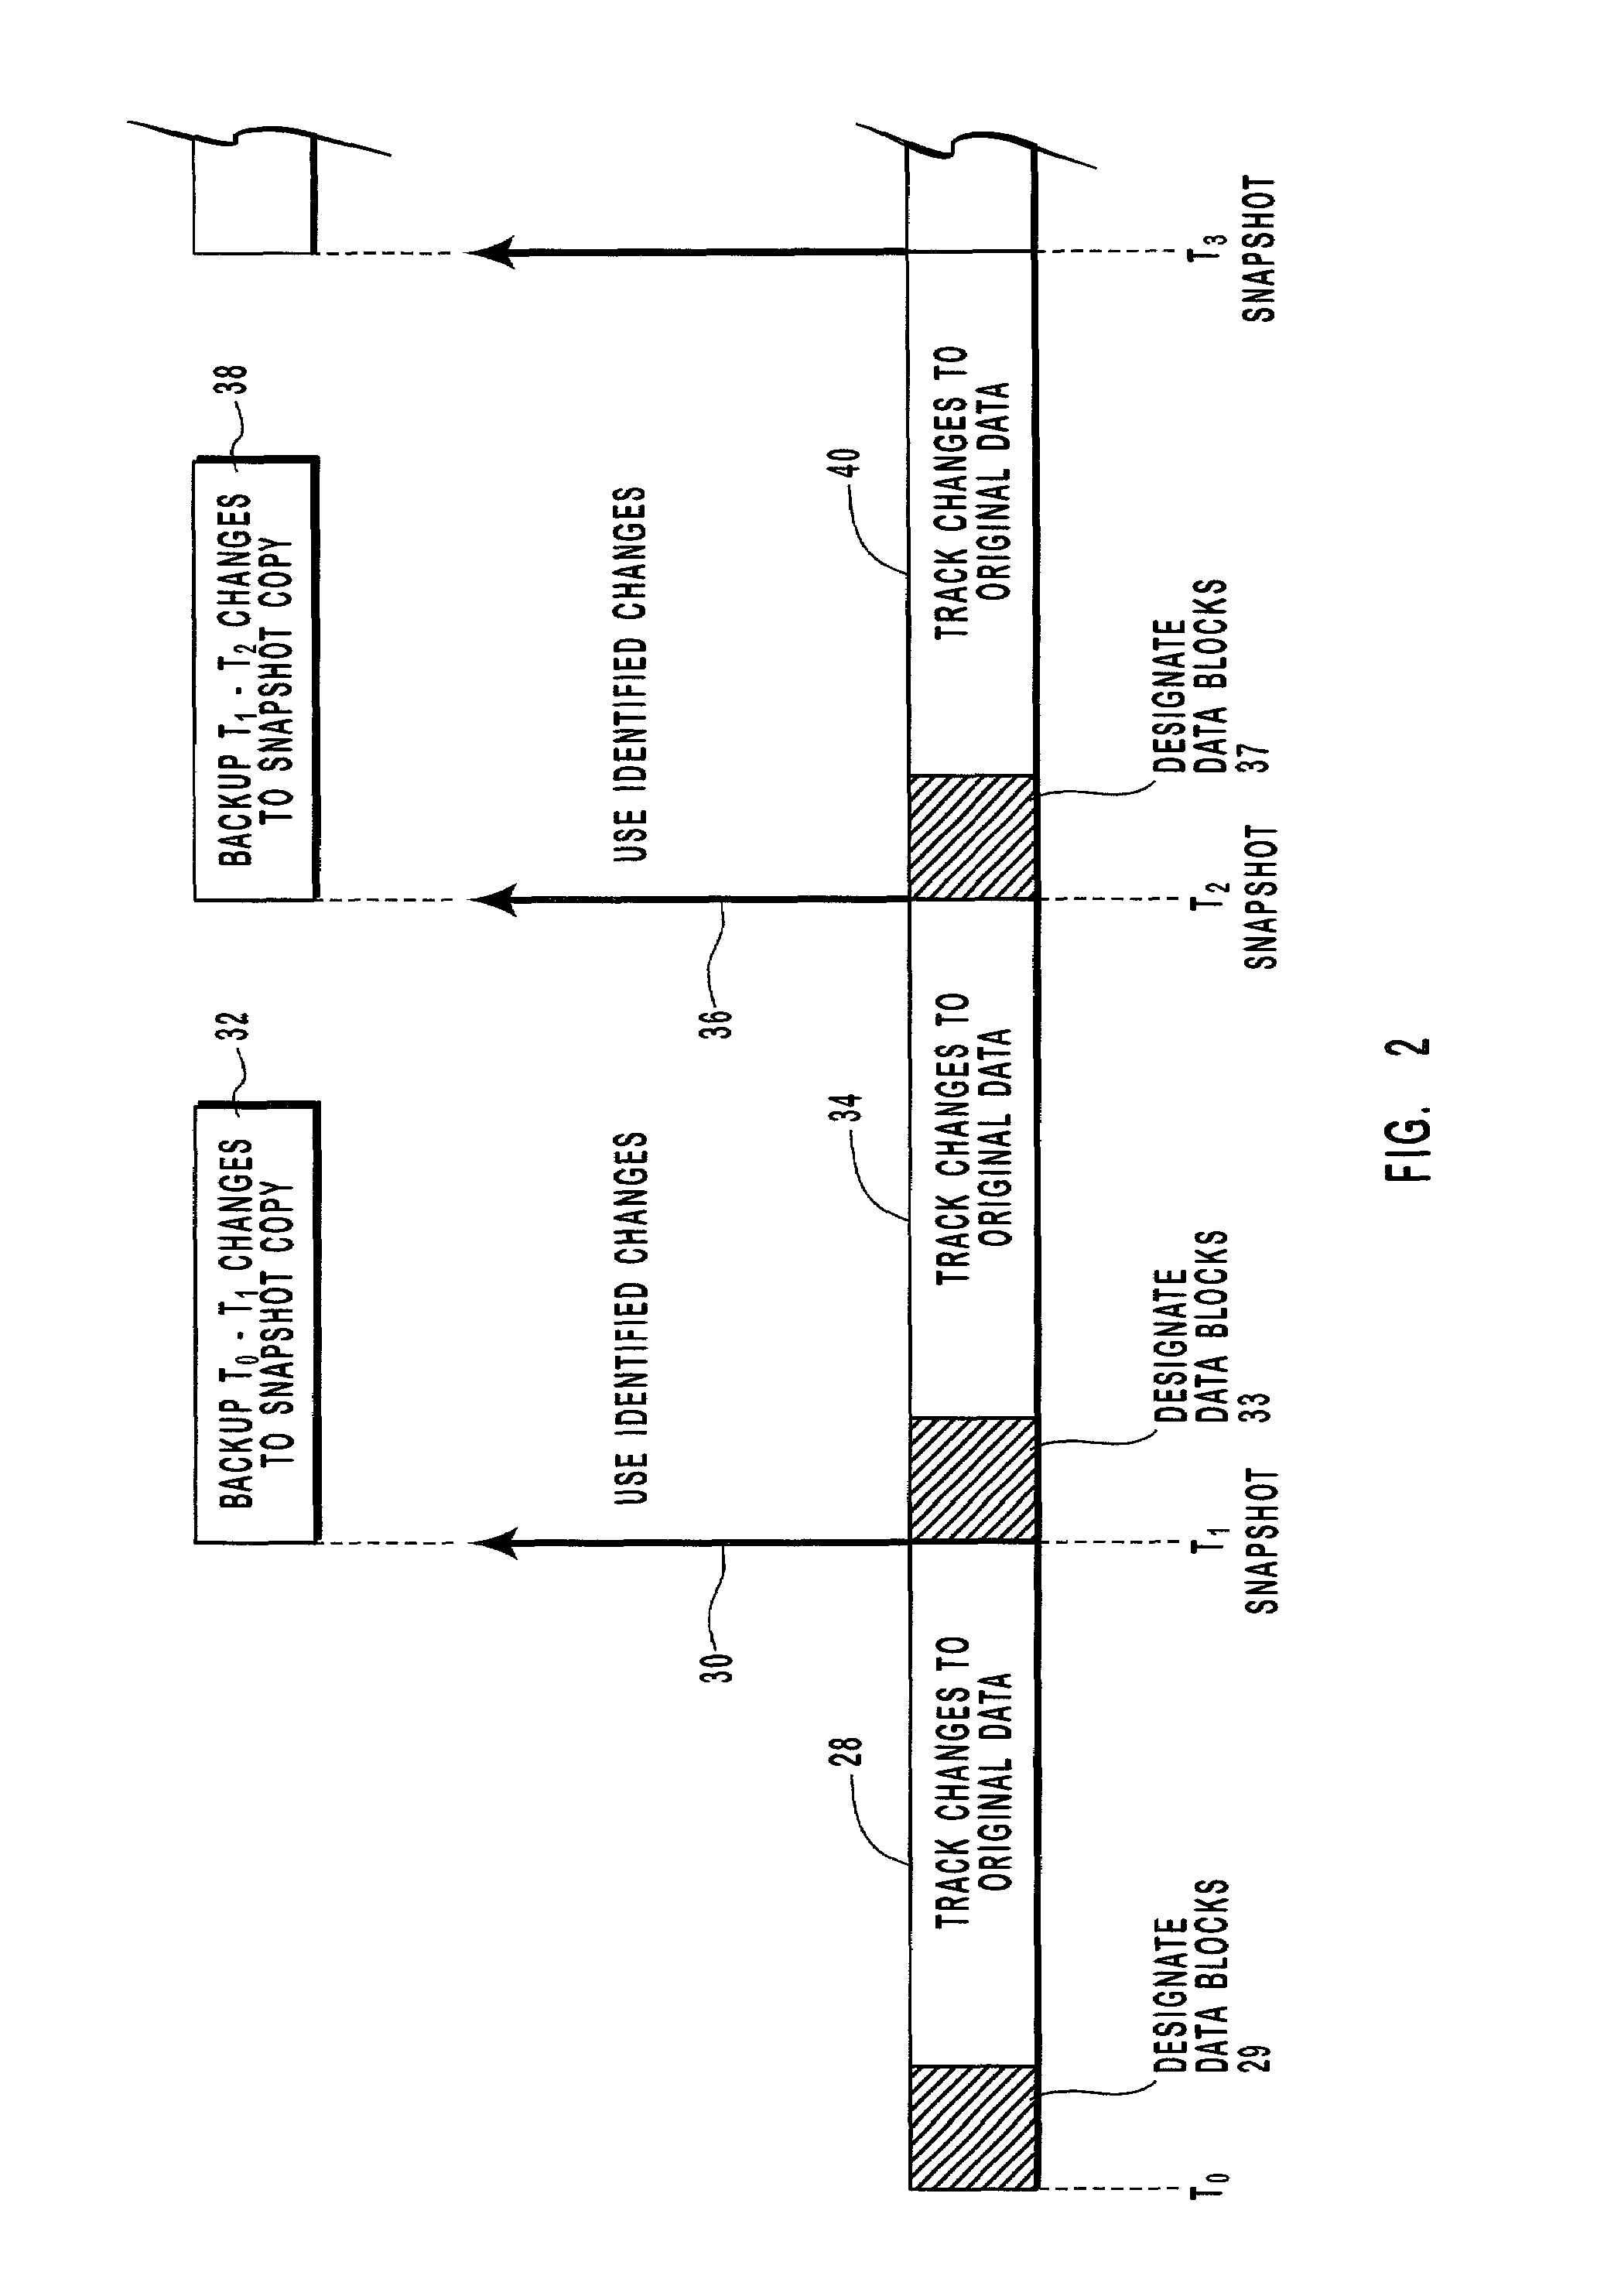 Preserving a snapshot of selected data of a mass storage system